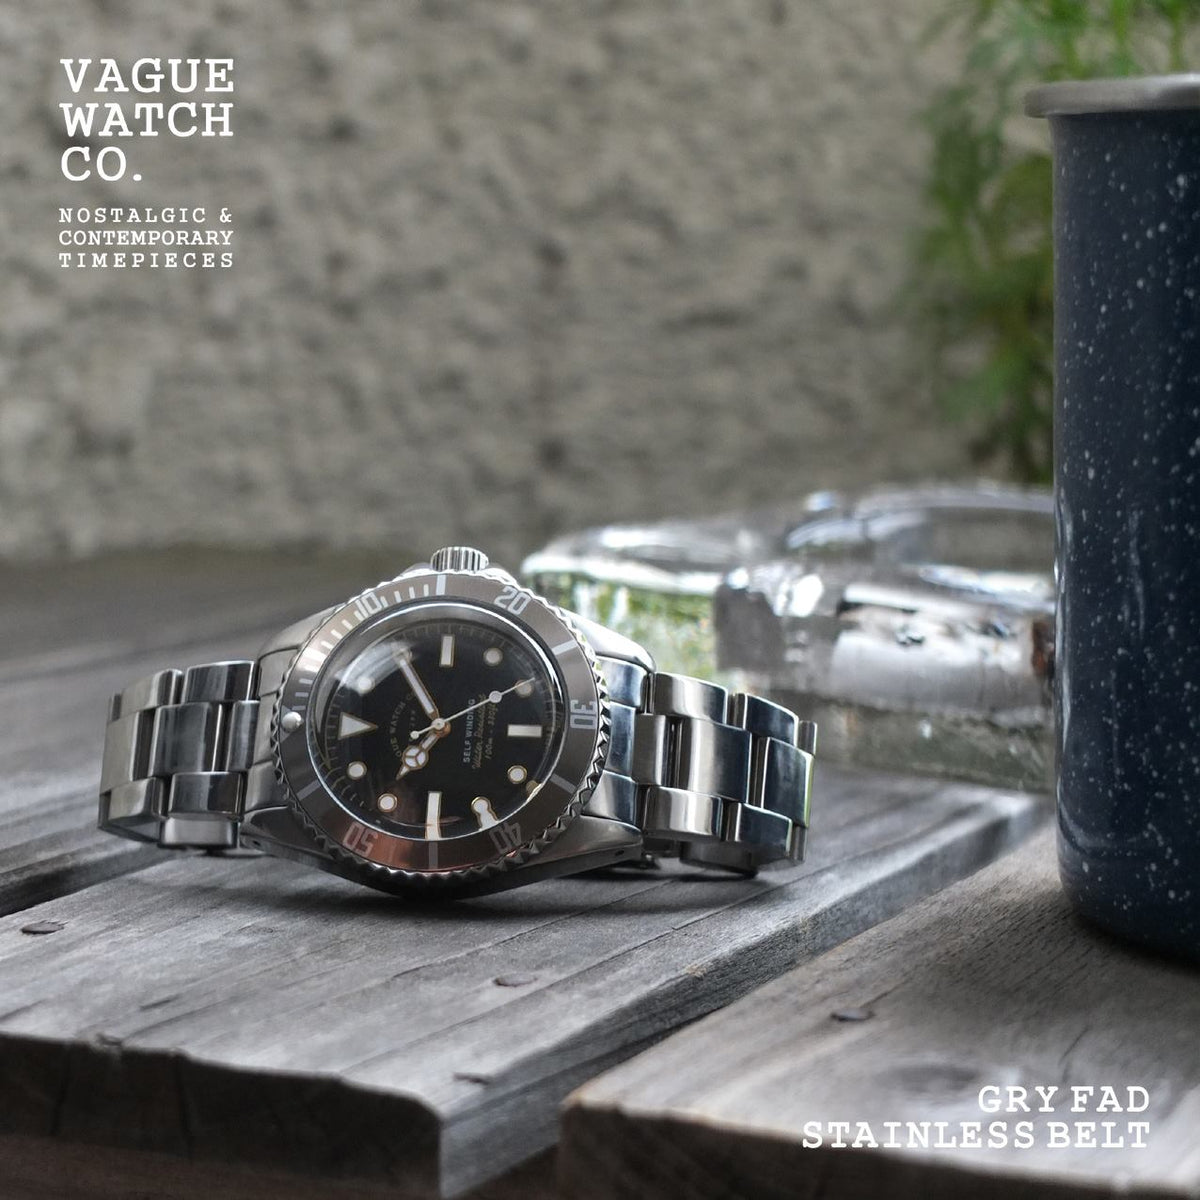 GRY FAD – VAGUE WATCH CO.